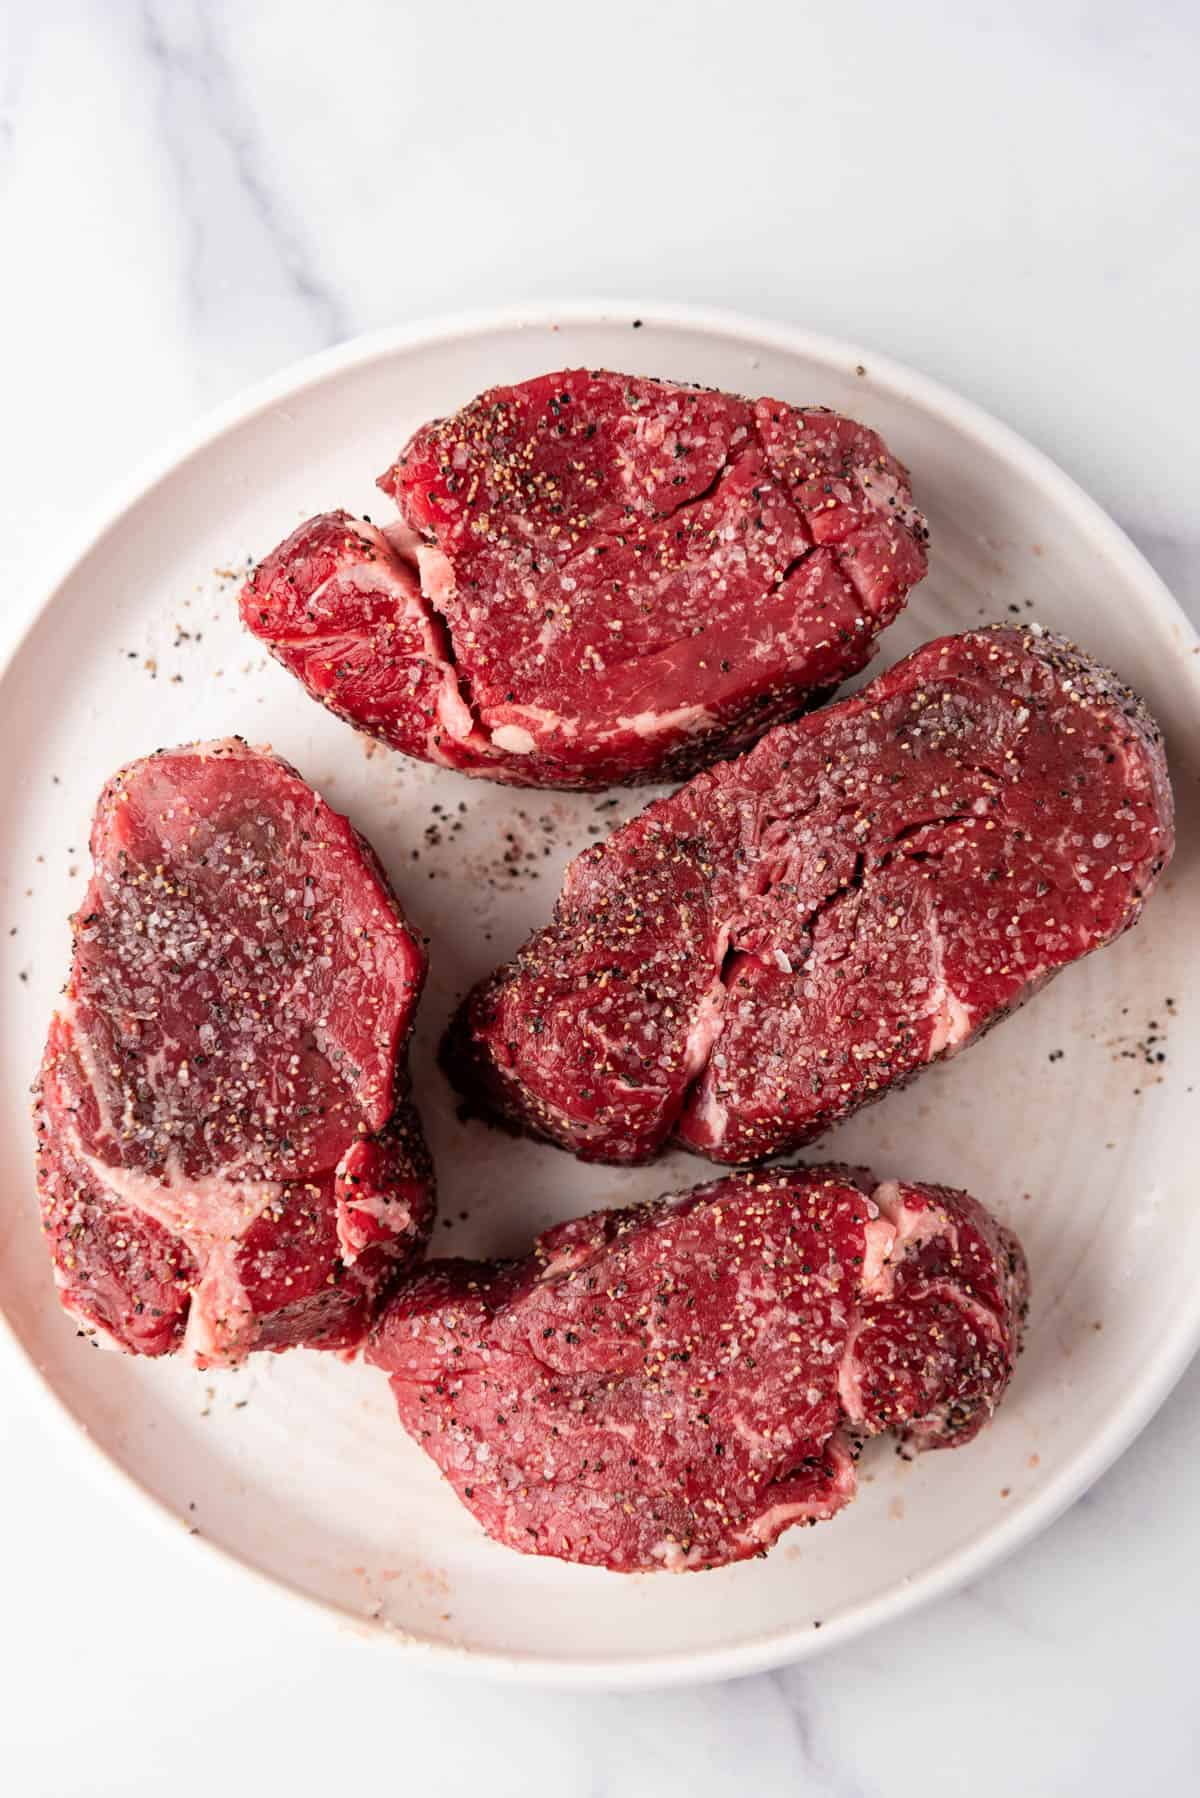 Four filet mignon steaks seasoned with salt and pepper on a plate.